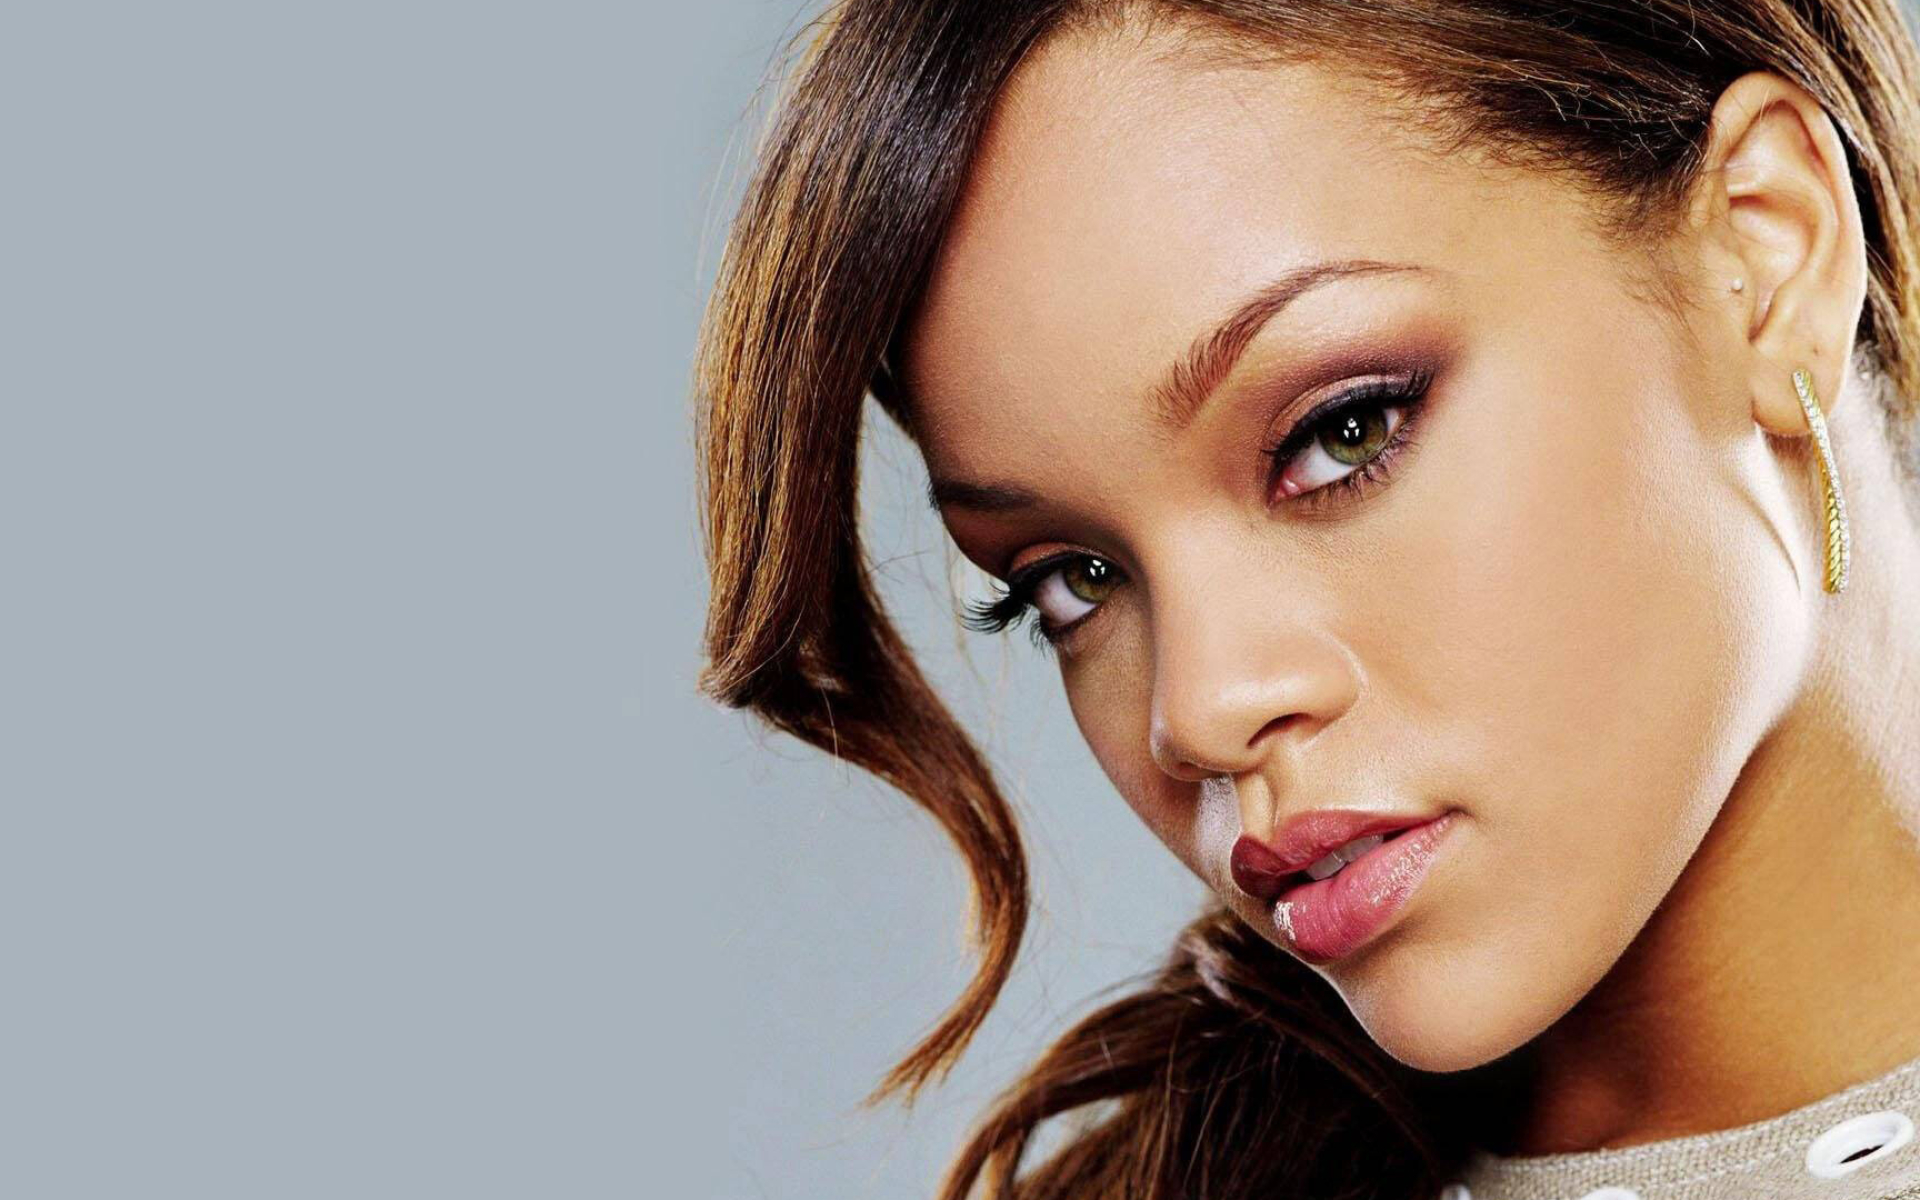 Rihanna: Celebrity, Collaborated with Jay-Z and Kanye West on “Run This Town”. 1920x1200 HD Wallpaper.